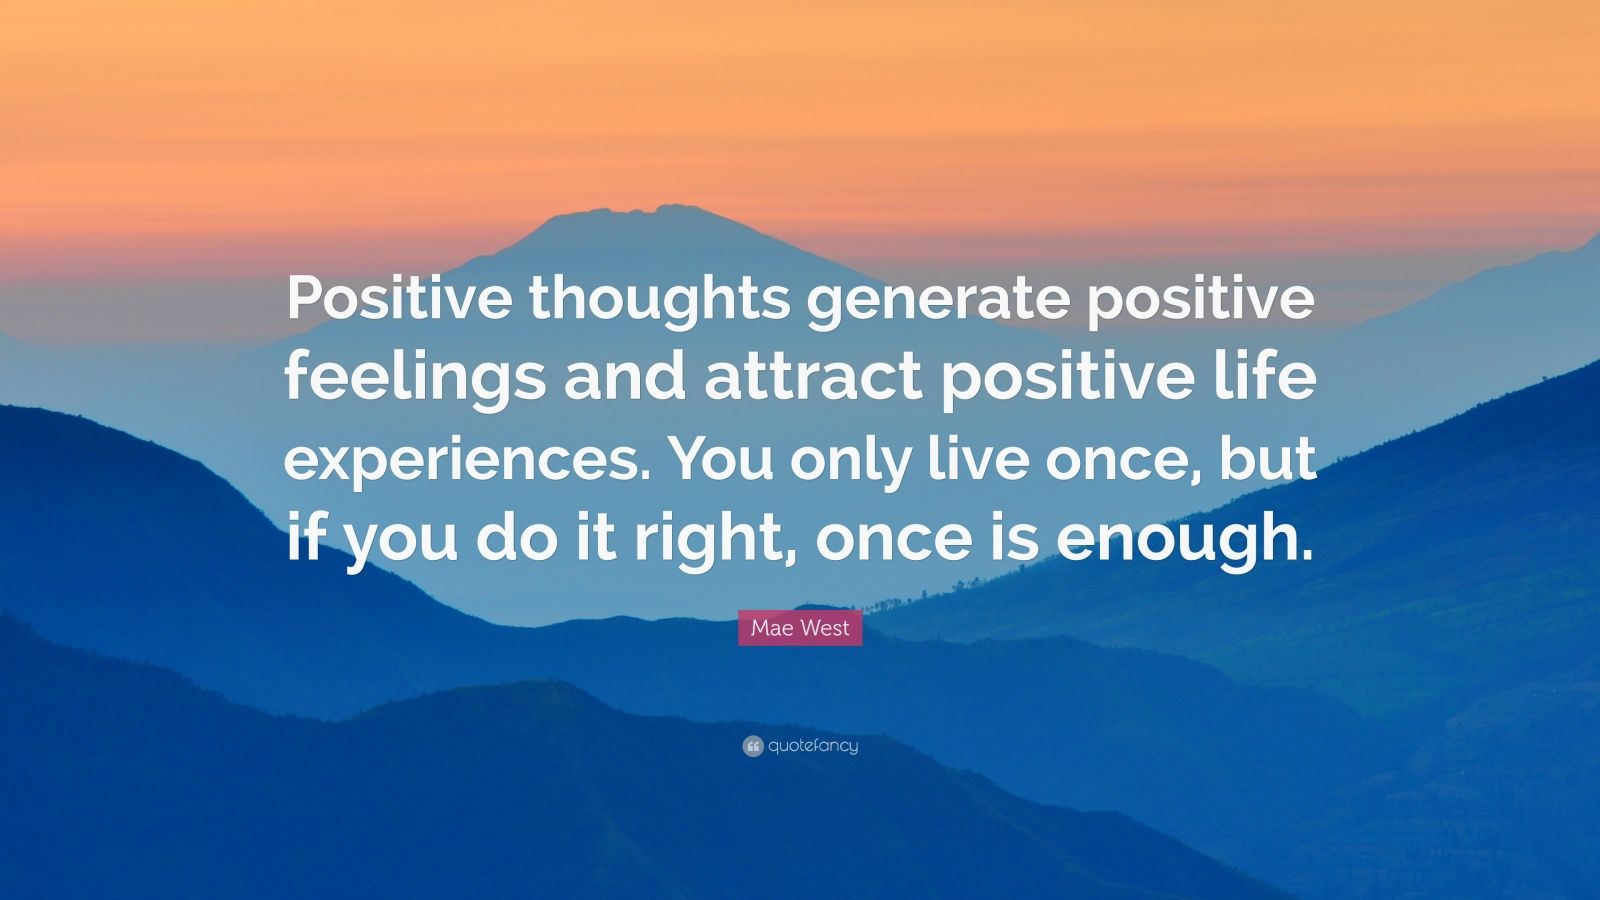 Mae West Quote: “Positive thoughts generate positive feelings and